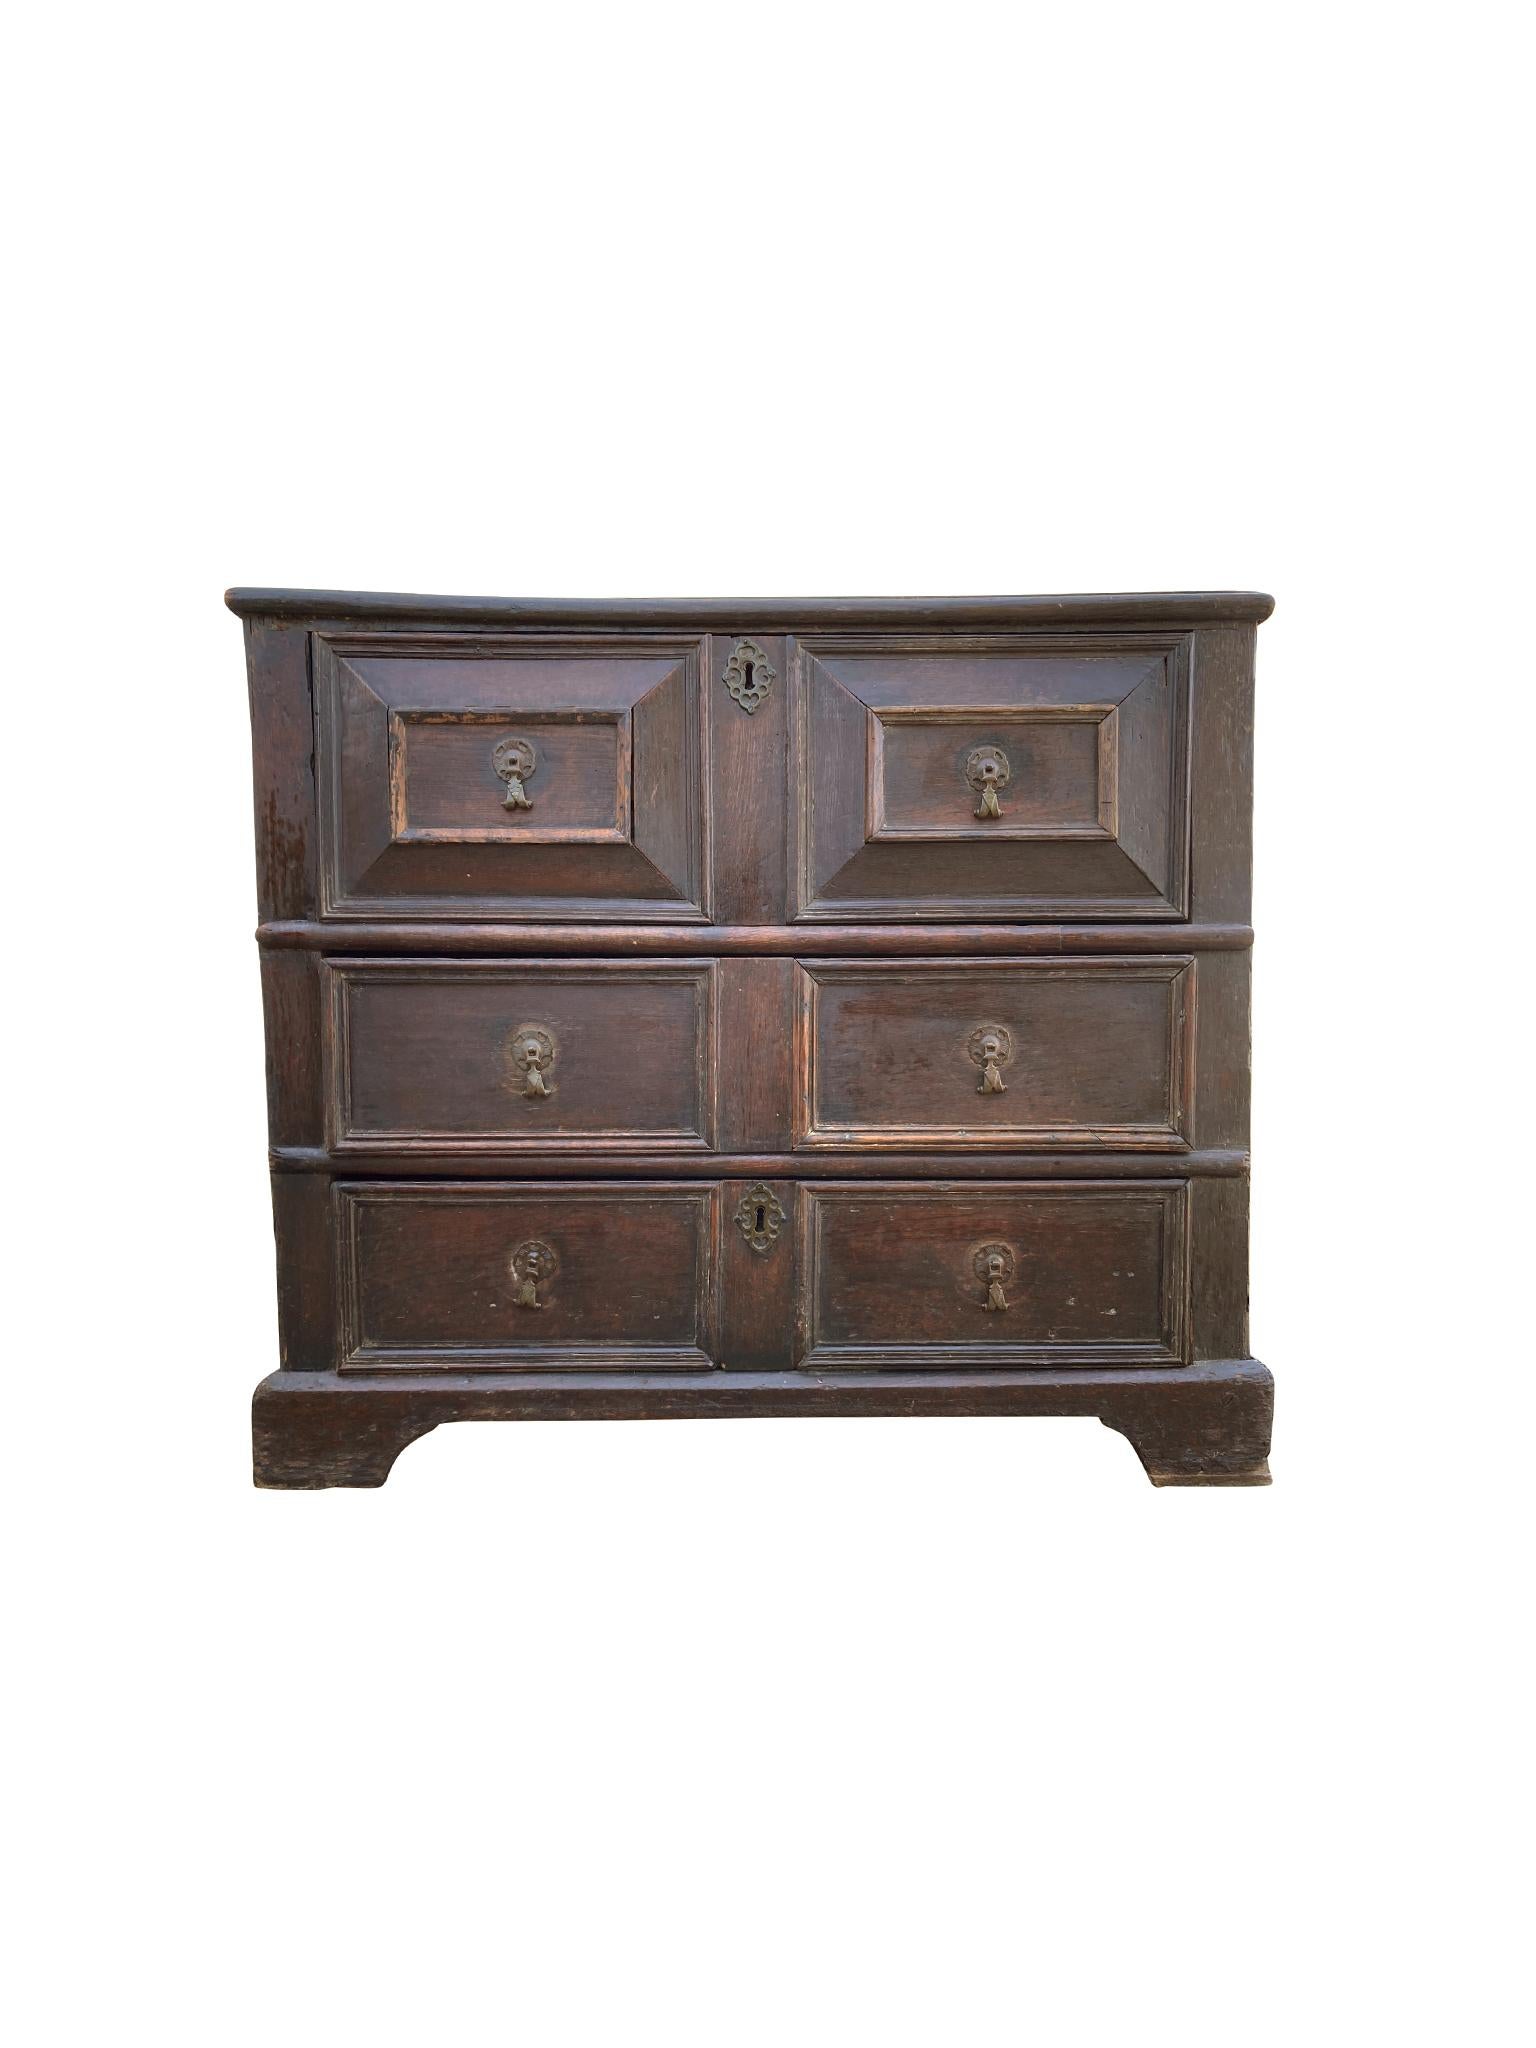 Beautifully aged William & Mary chest of drawers, hand-crafted Late 17th-Early 18th Century. The chest is oak with metal pulls. We love the warm tone of the wood and the organic wear it has accrued over the centuries. The design of the chest